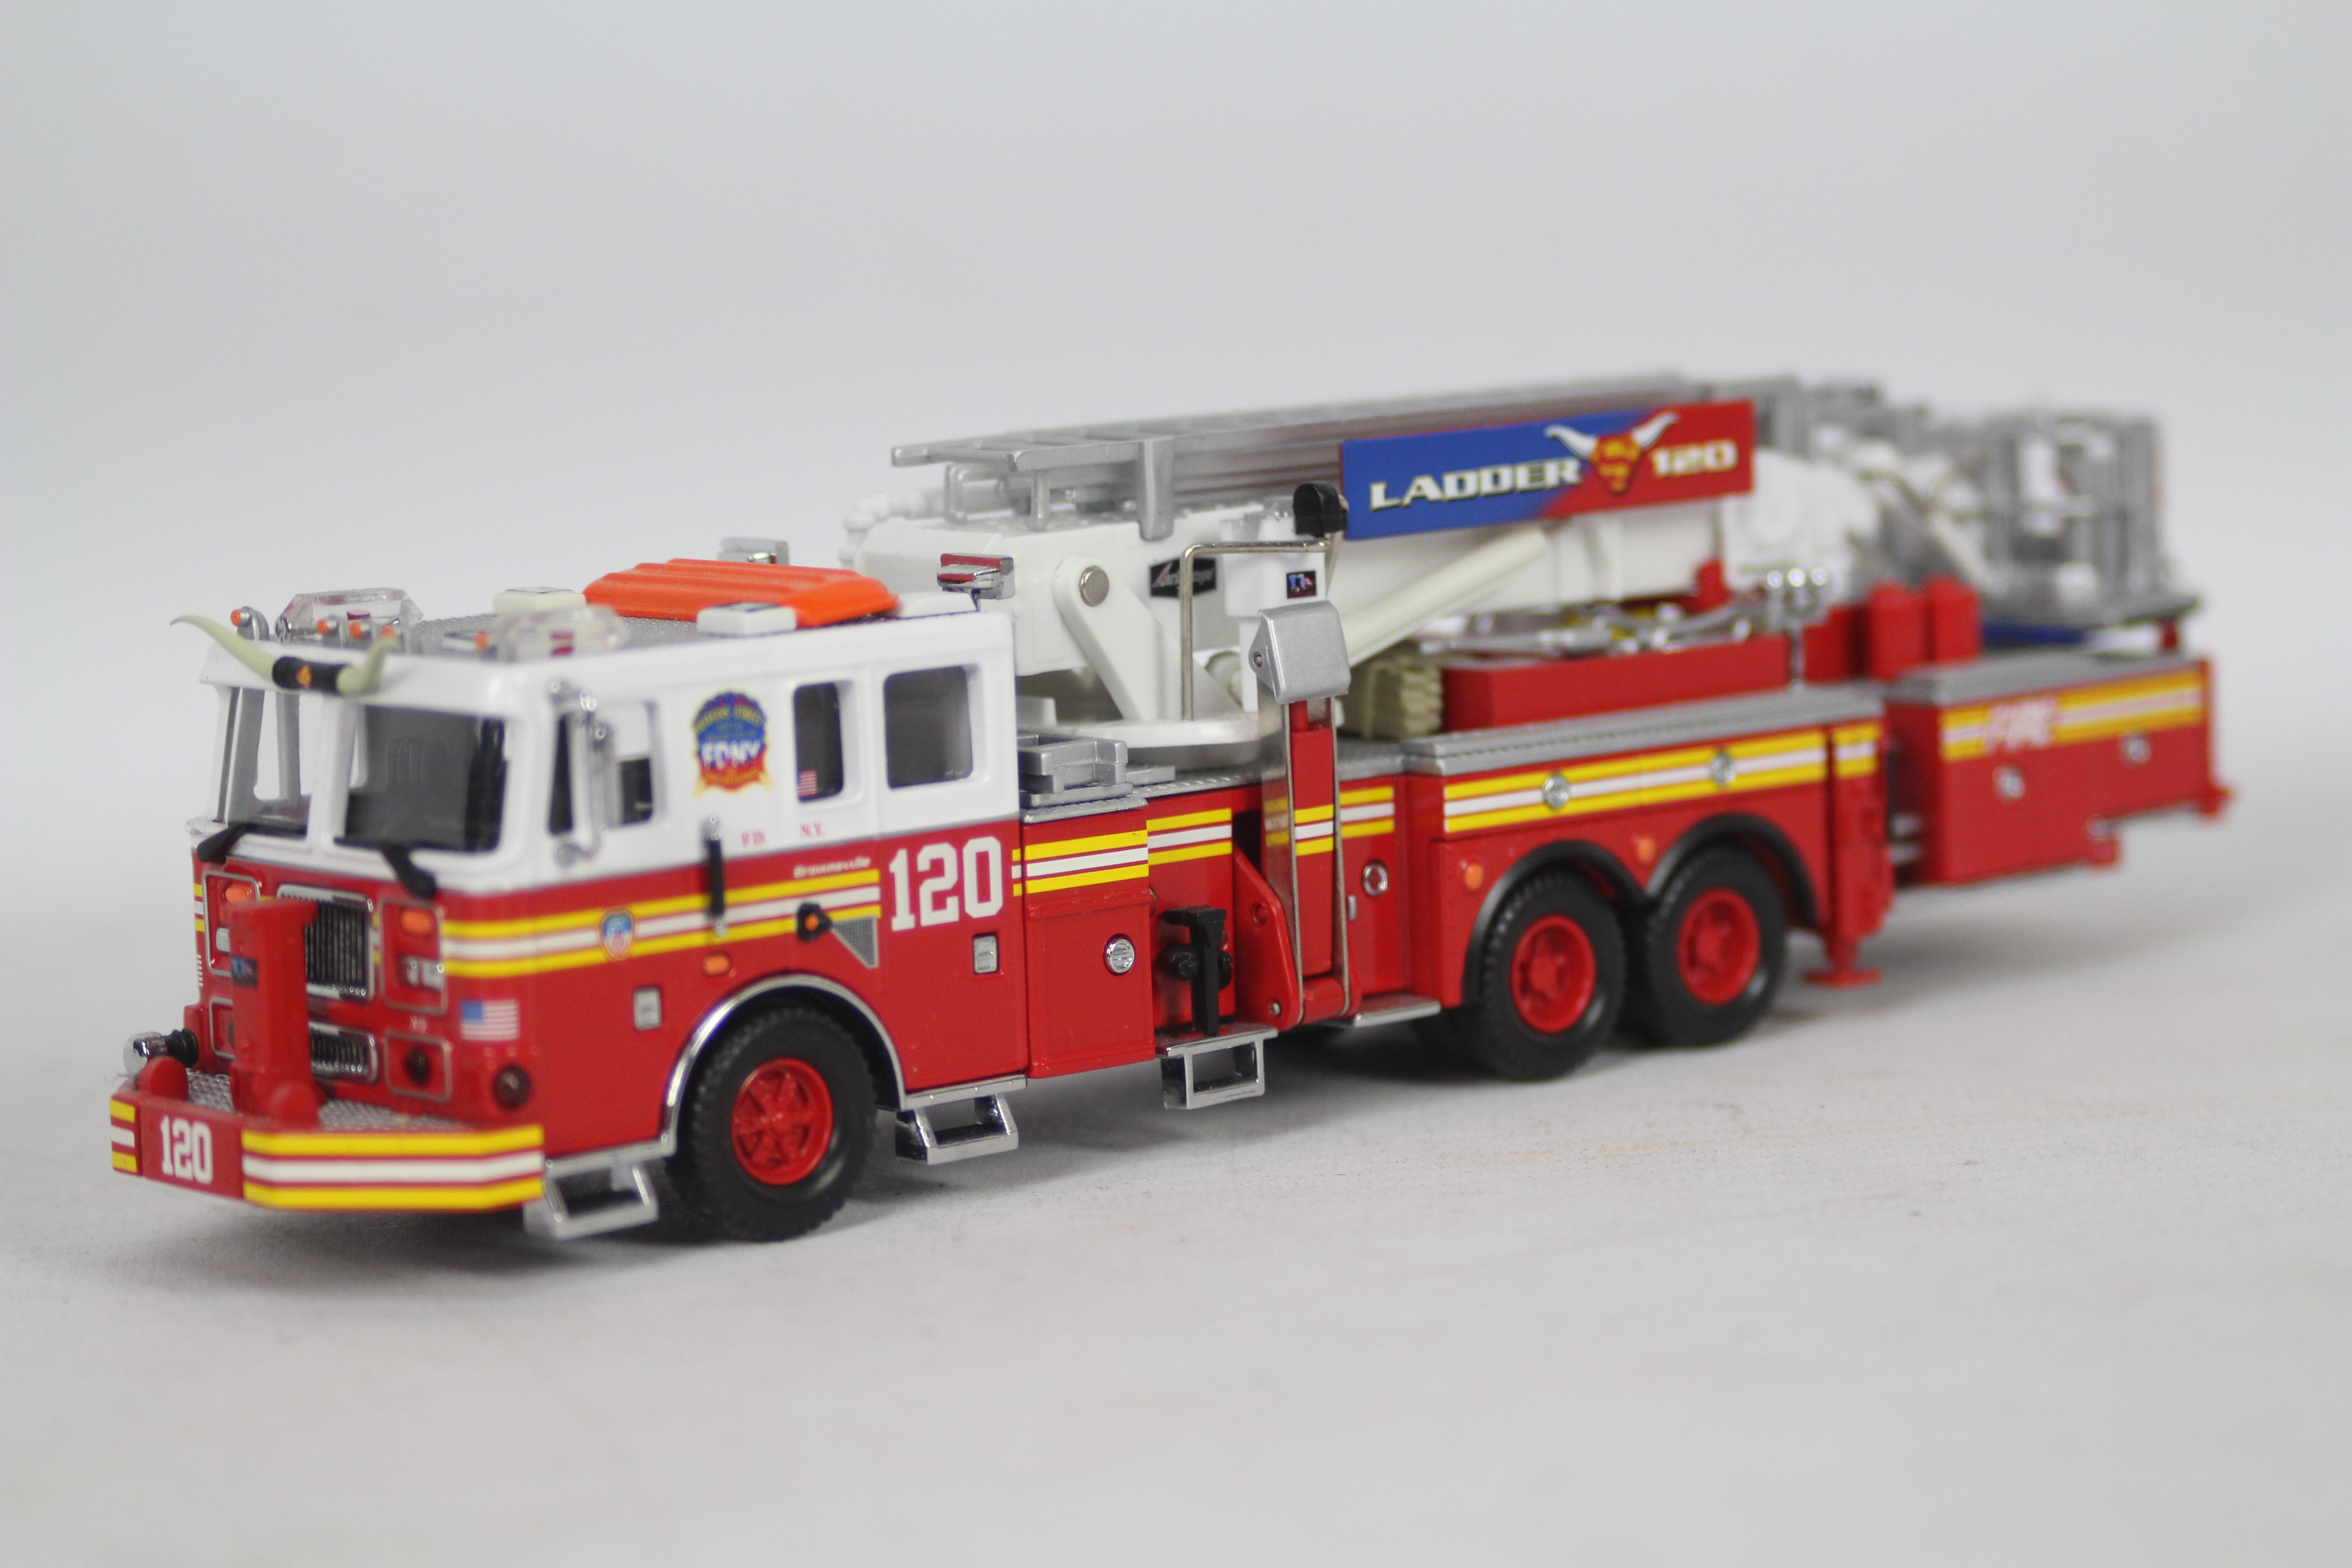 Code 3 Collectibles - An unboxed Seagrave Aerialscope Ladder 120 in FDNY livery in 1:64 scale #